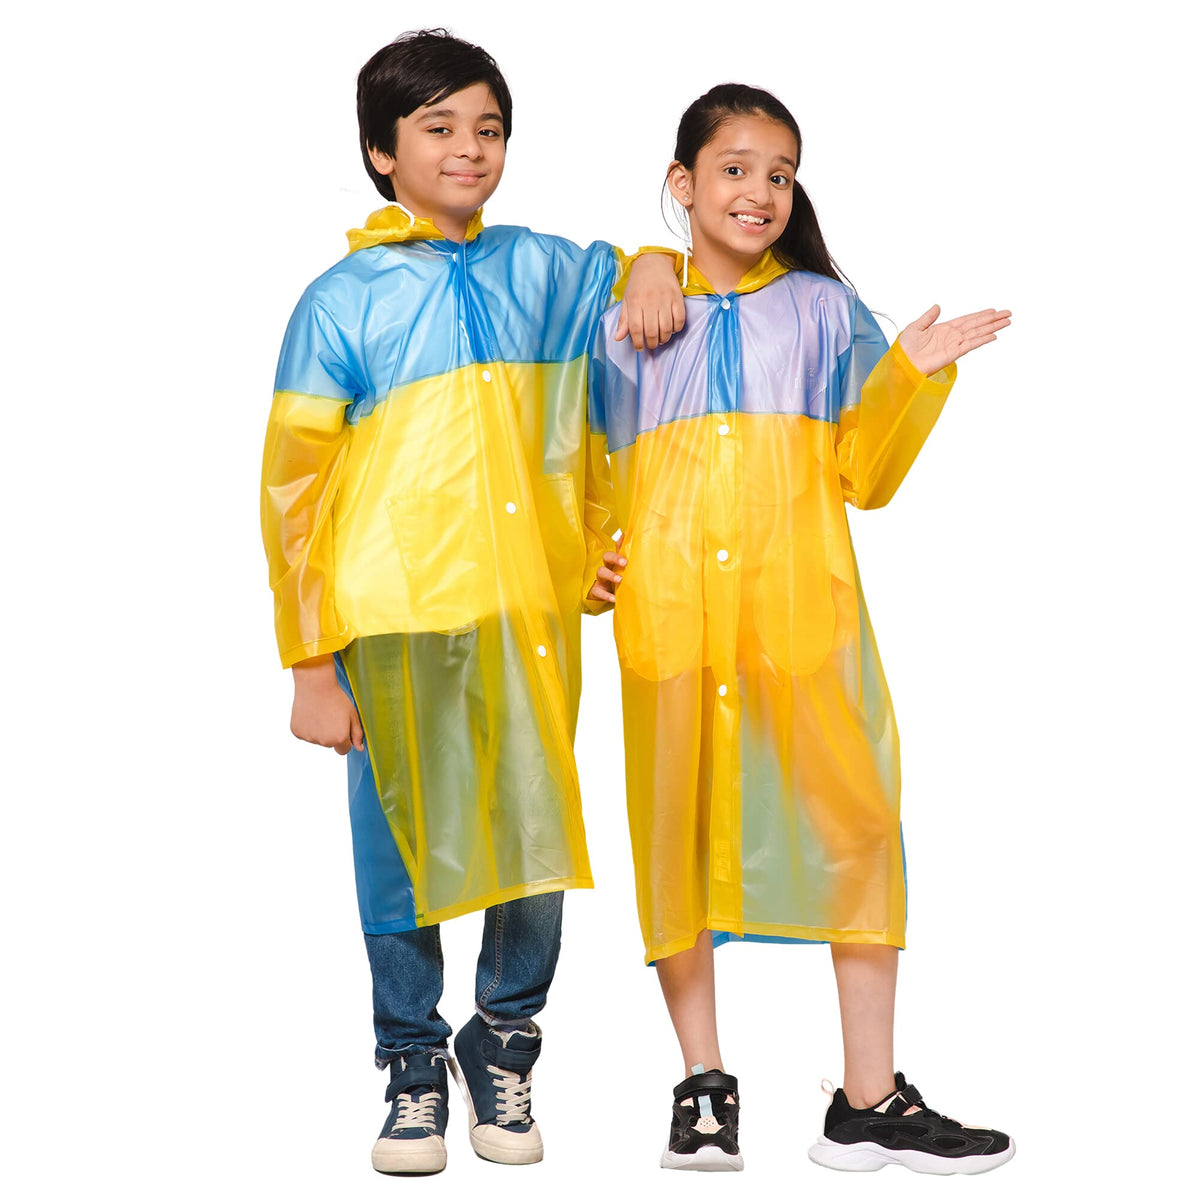 THE CLOWNFISH Puddle Jumper Series Unisex Kids Waterproof Single Layer PVC Longcoat/Raincoat with Adjustable Hood. Age-4-5 Years (Fluoroscent Pink)